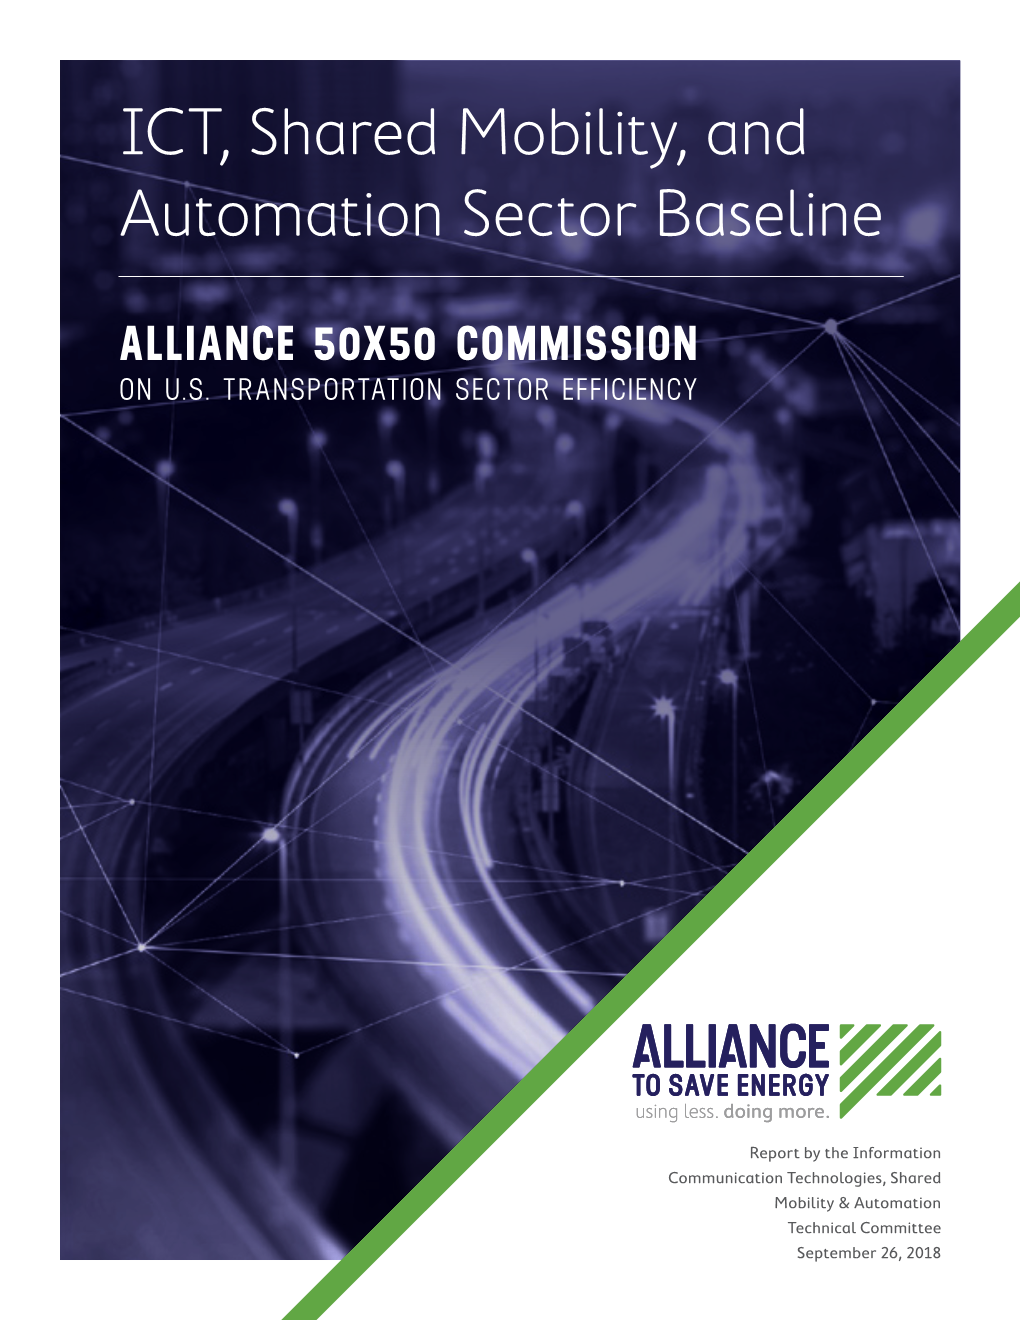 ICT, Shared Mobility, and Automation Sector Baseline